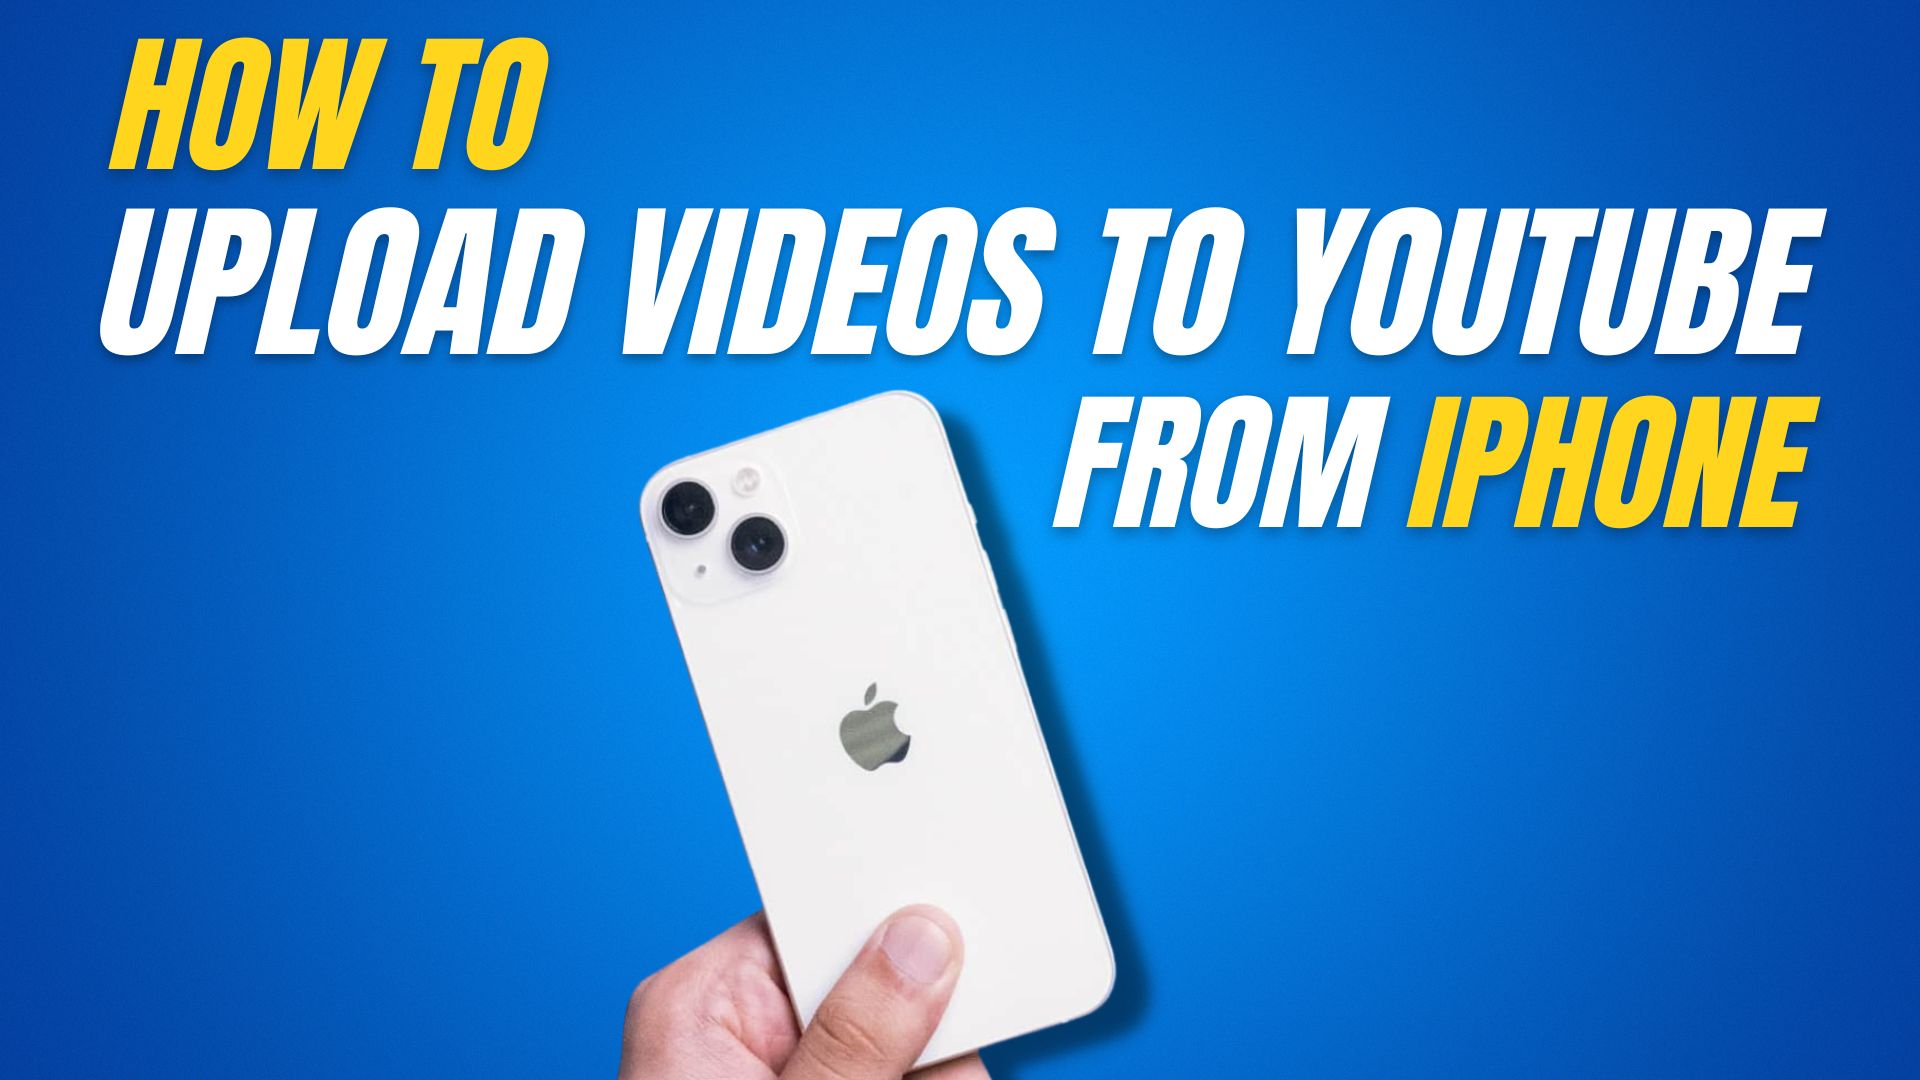 How to Upload Videos to YouTube from iPhone or iPad